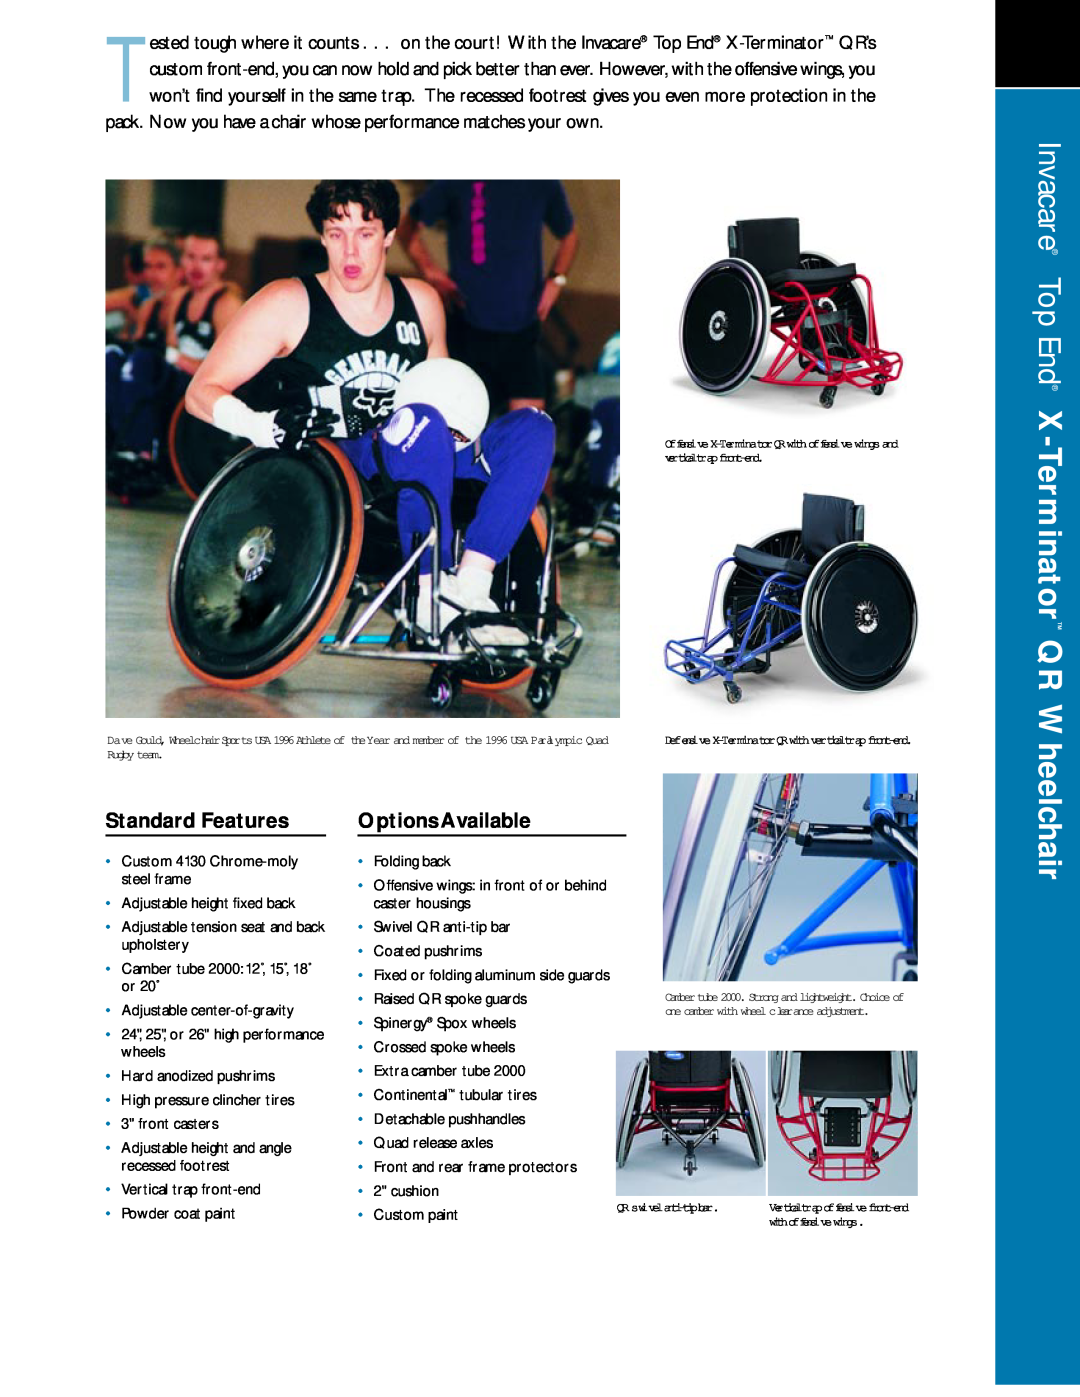 Invacare Terminator Series manual pack. Now you have a chair whose performance matches your own, Standard Features 